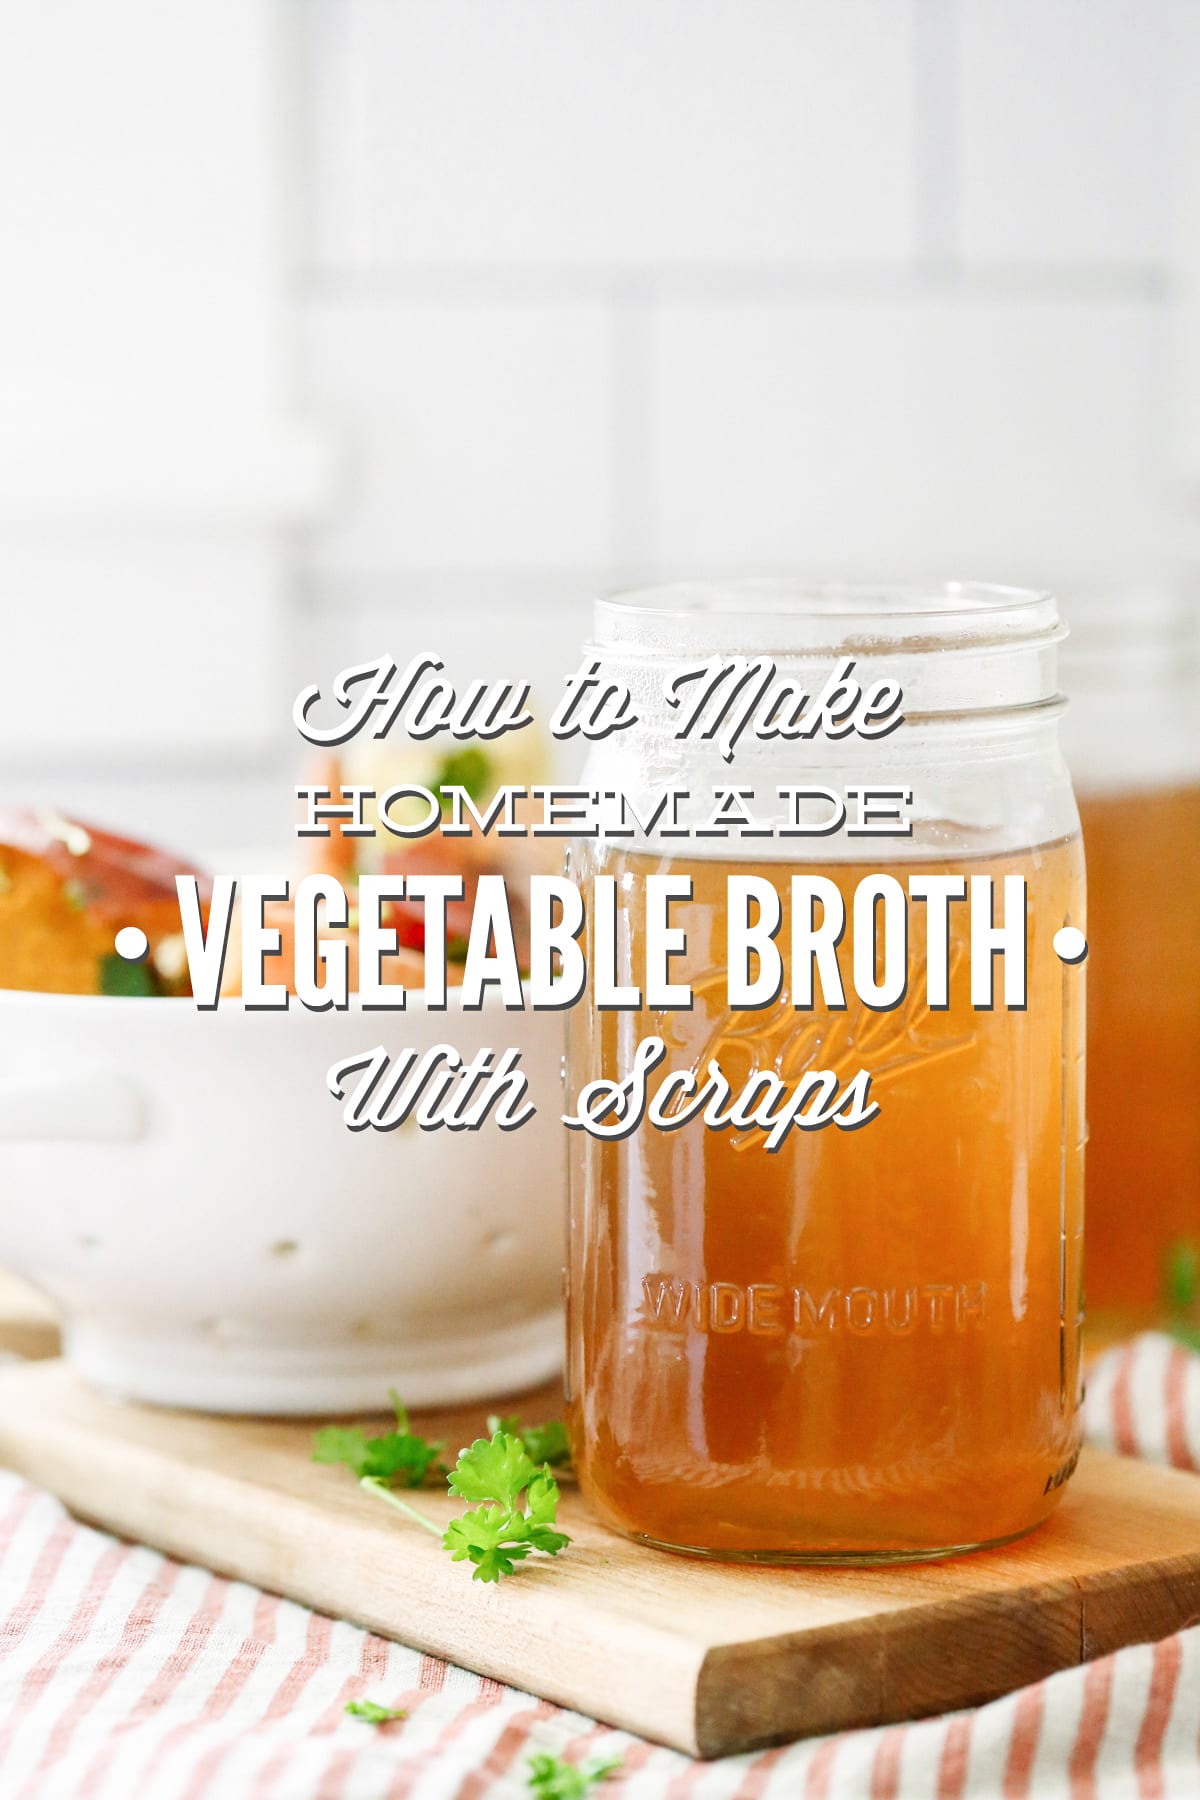 How to Make Homemade Vegetable Broth with Scraps (Crock-Pot Method)